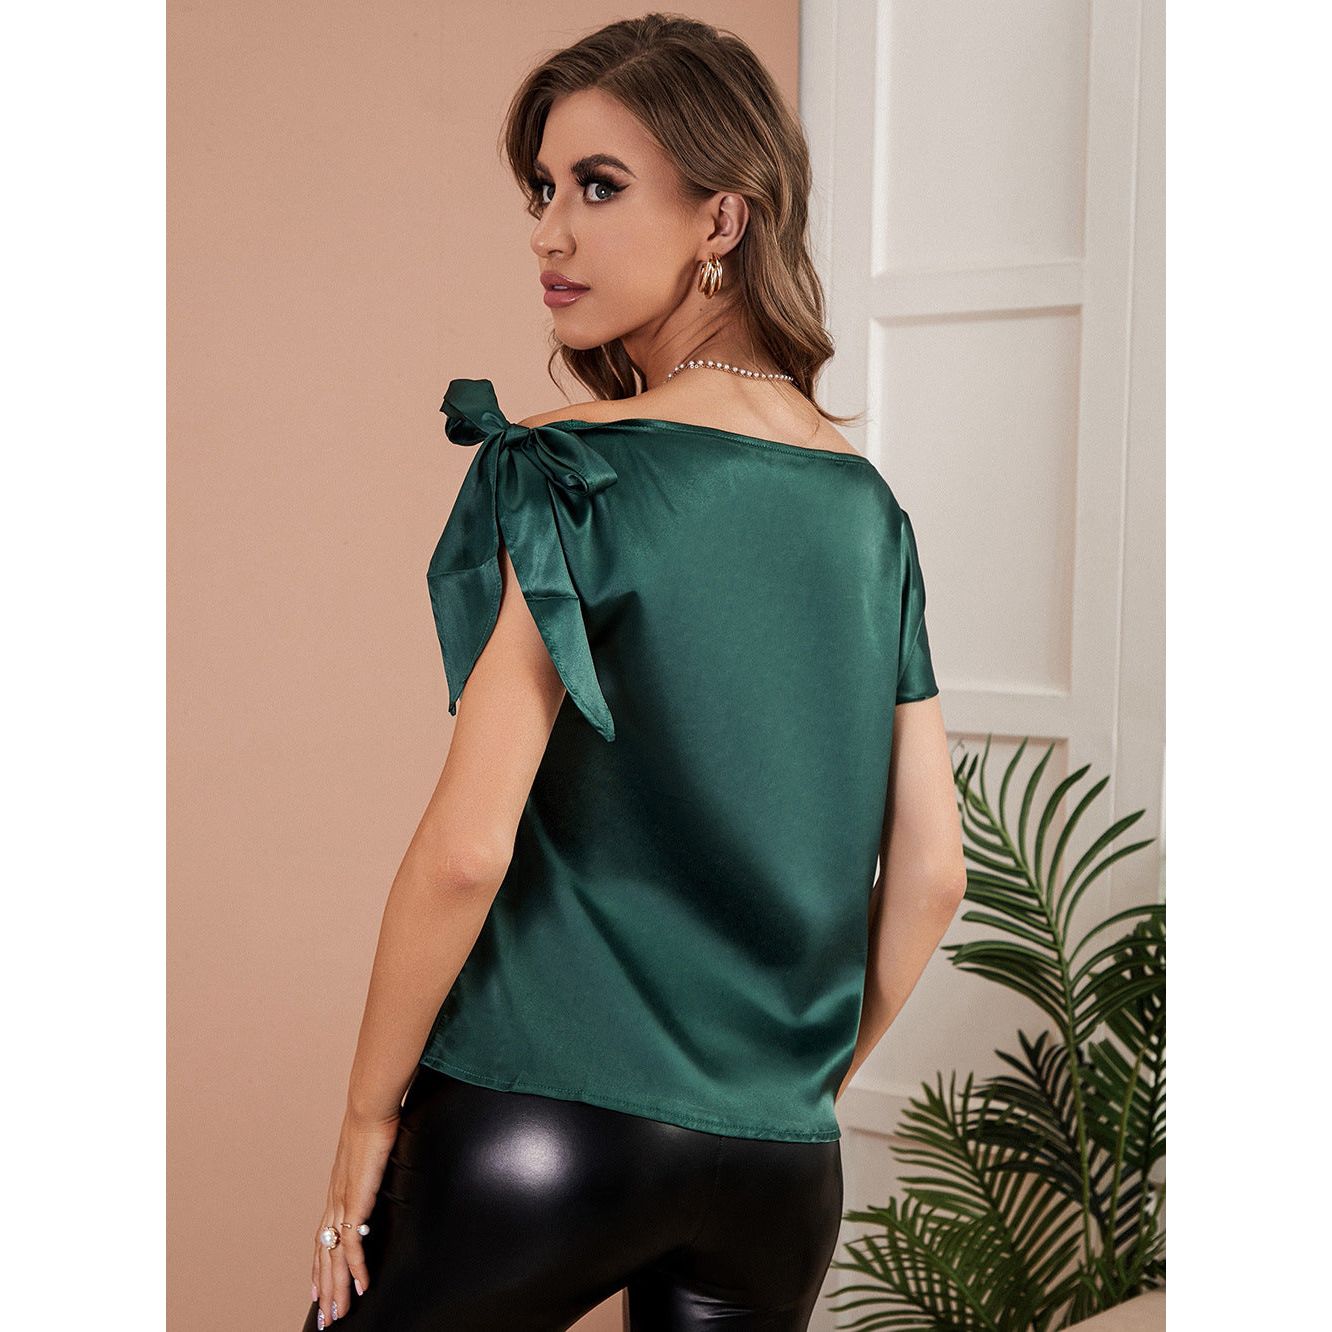 Buy Online Premimum Quality, Trendy and Highly Comfortable Summer Off-shoulder Pullover Bow Top - FEYONAS